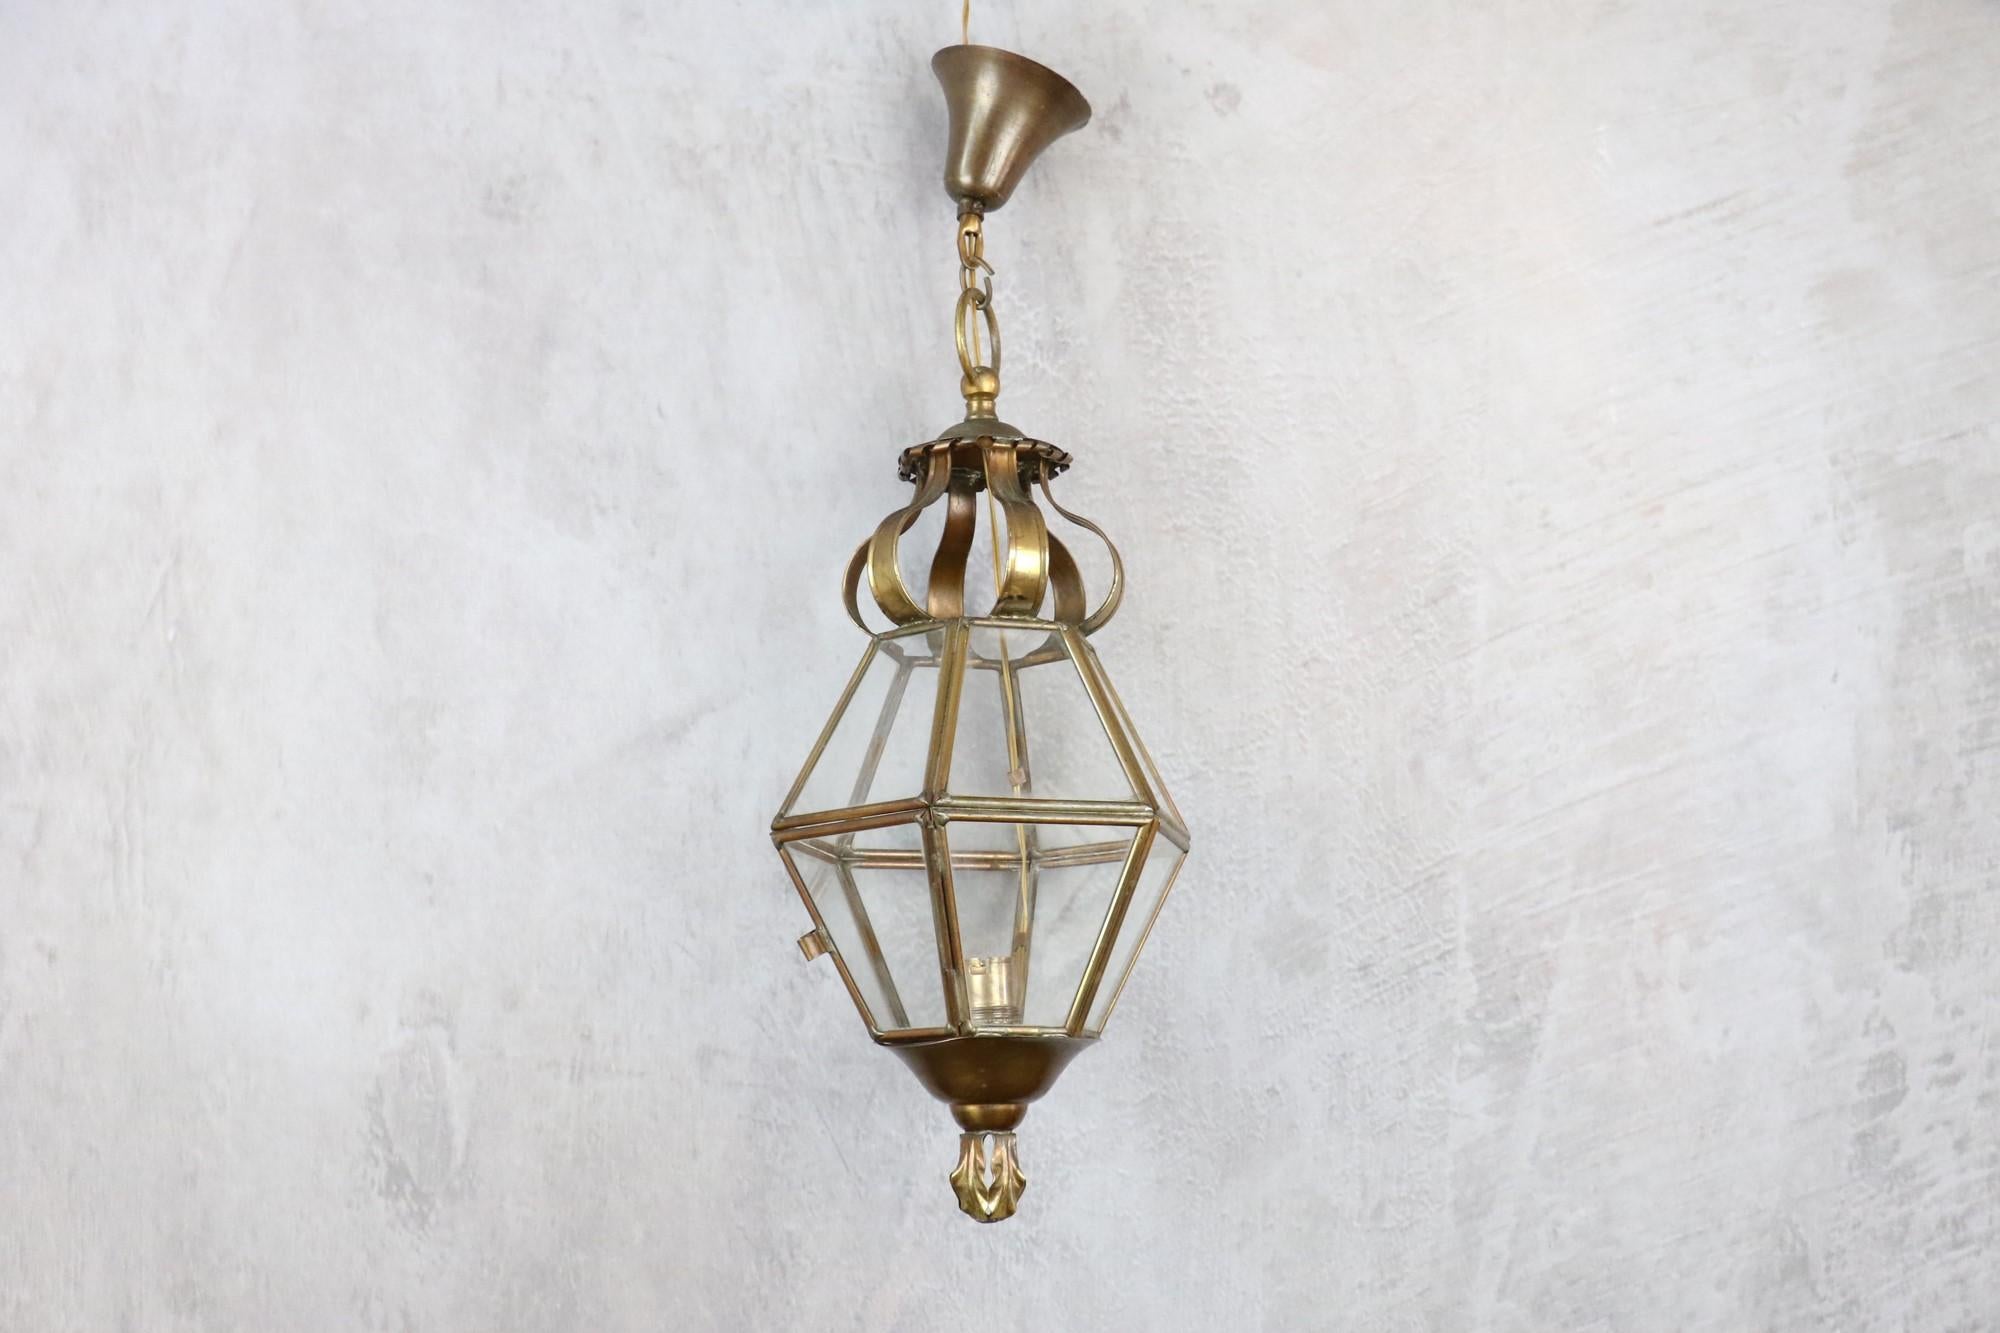 French vintage brass and cut clear glass hexagonal hanging lantern from circa the 1950s.
This adorable pendant lantern features a hexagonal brass and metal frame. Six faces and 12 clear glass panels on two levels.

Its height is 54cm (45cm without